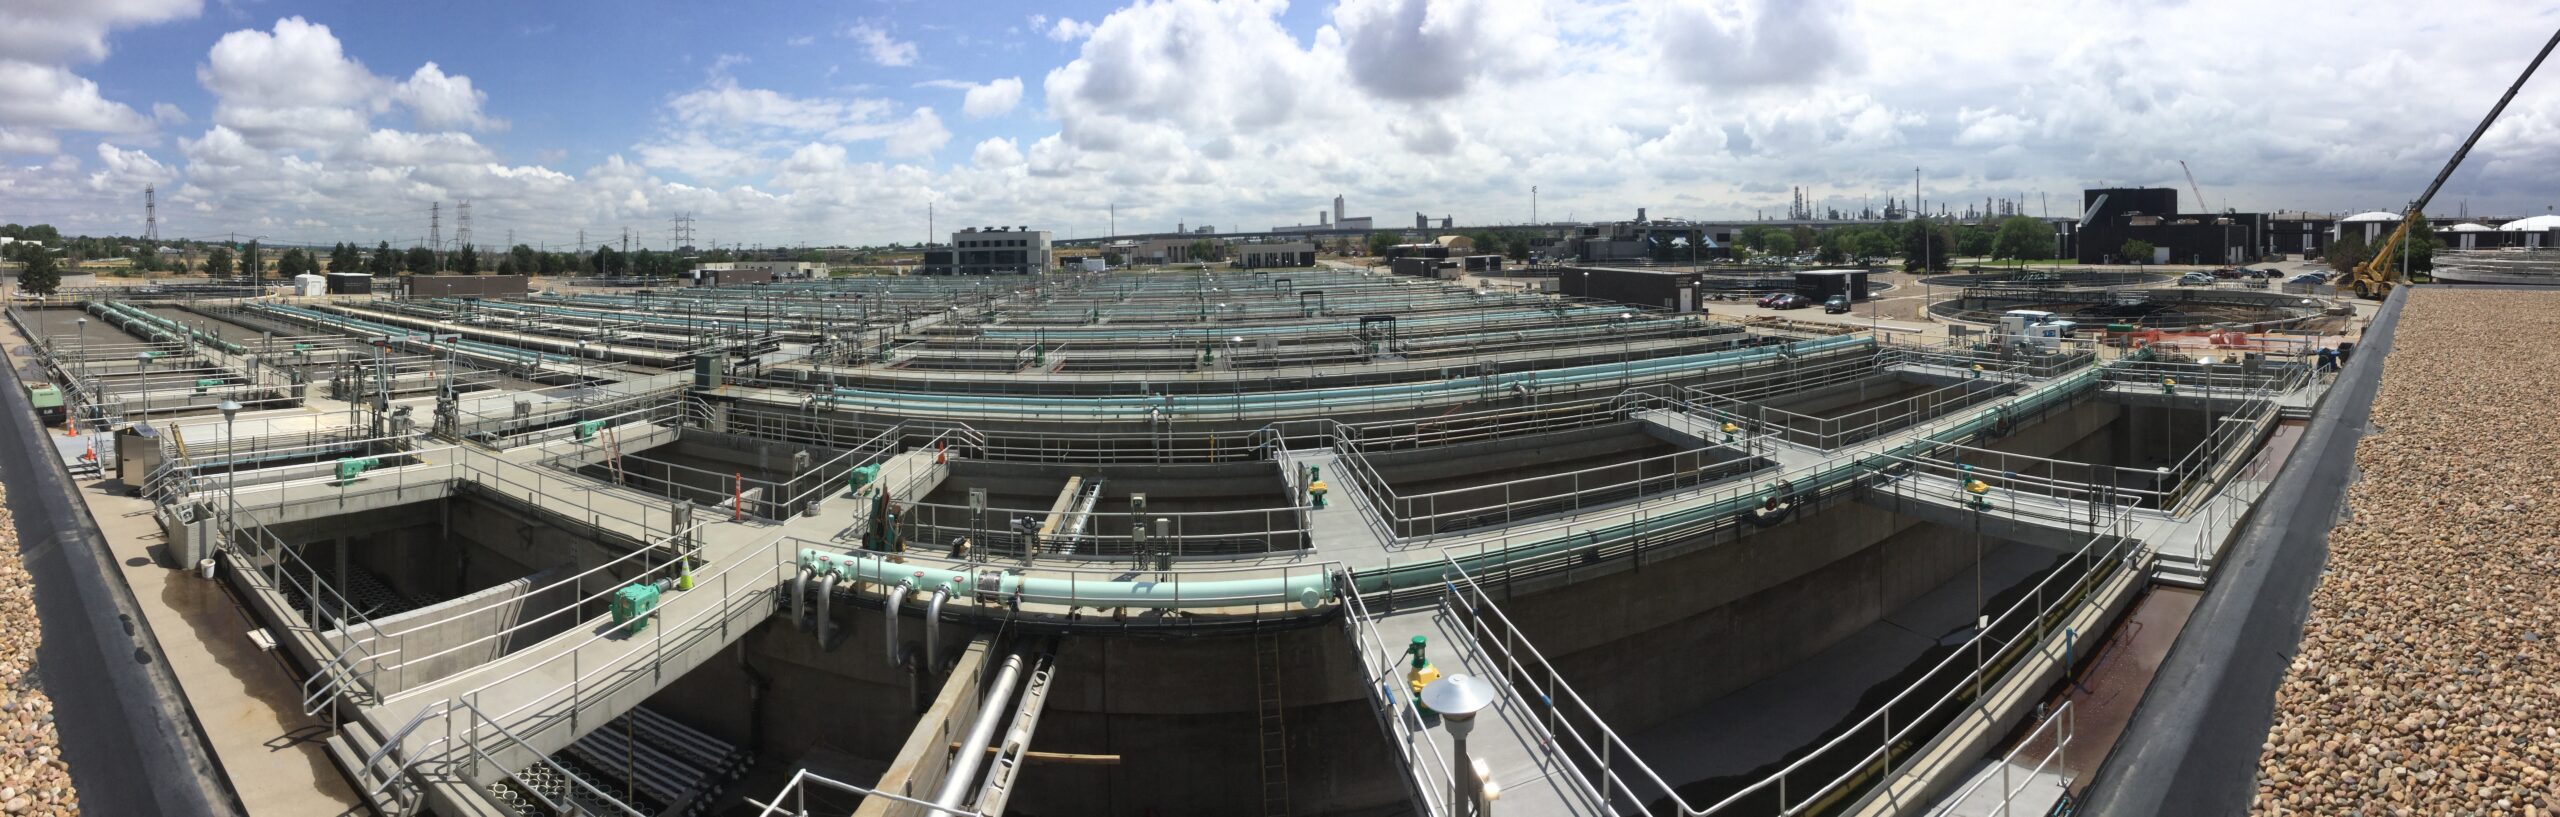 a panoramic view of our plant facilities displaying aeration basins